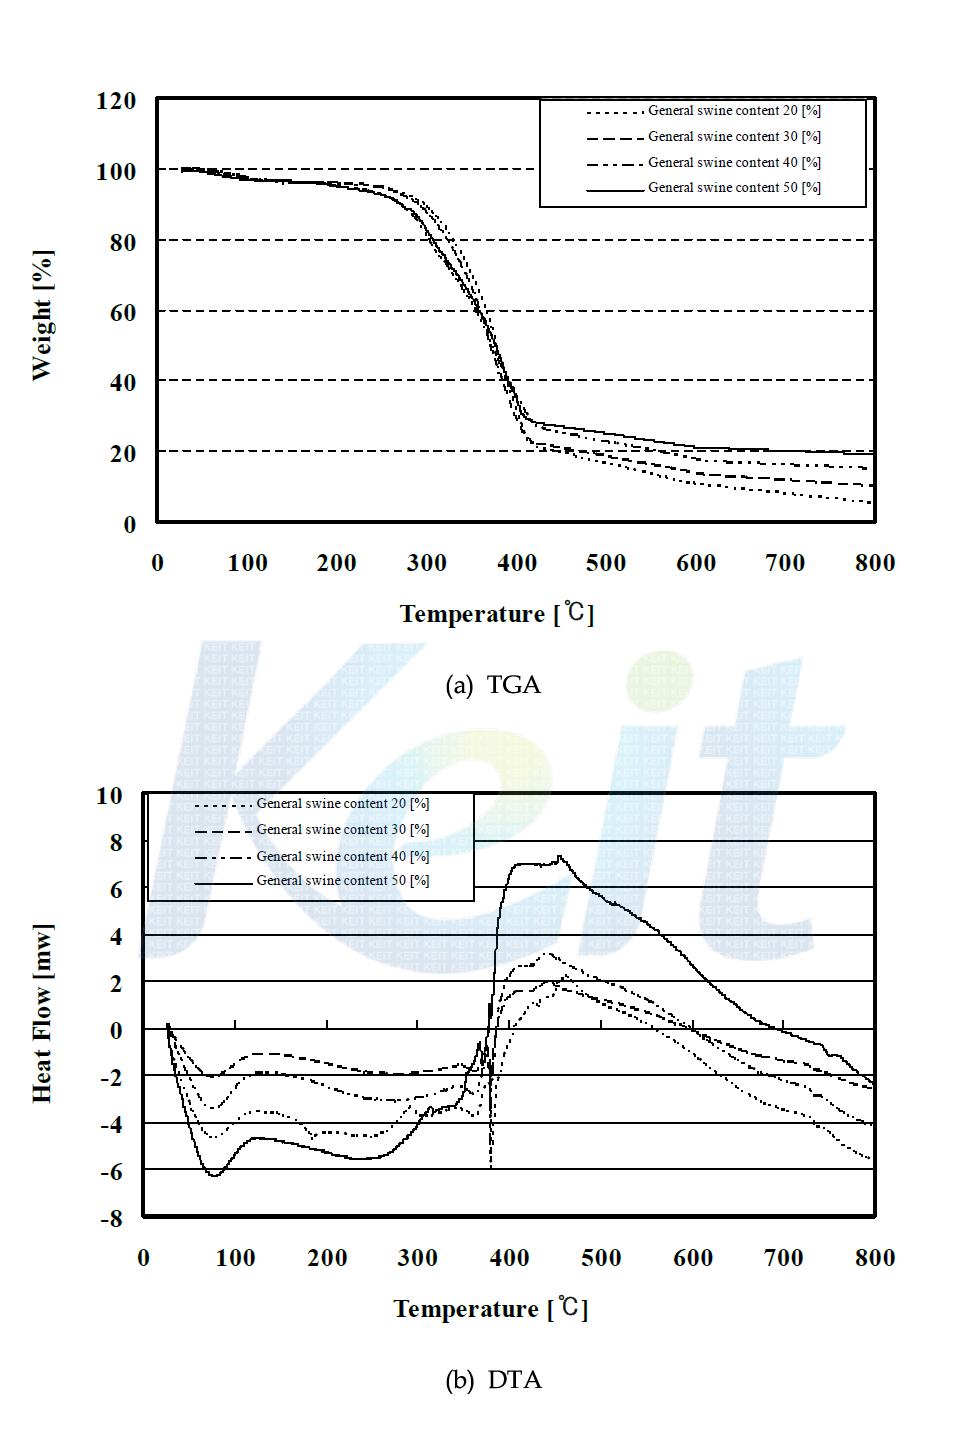 TGA and DTA curves with general swine content